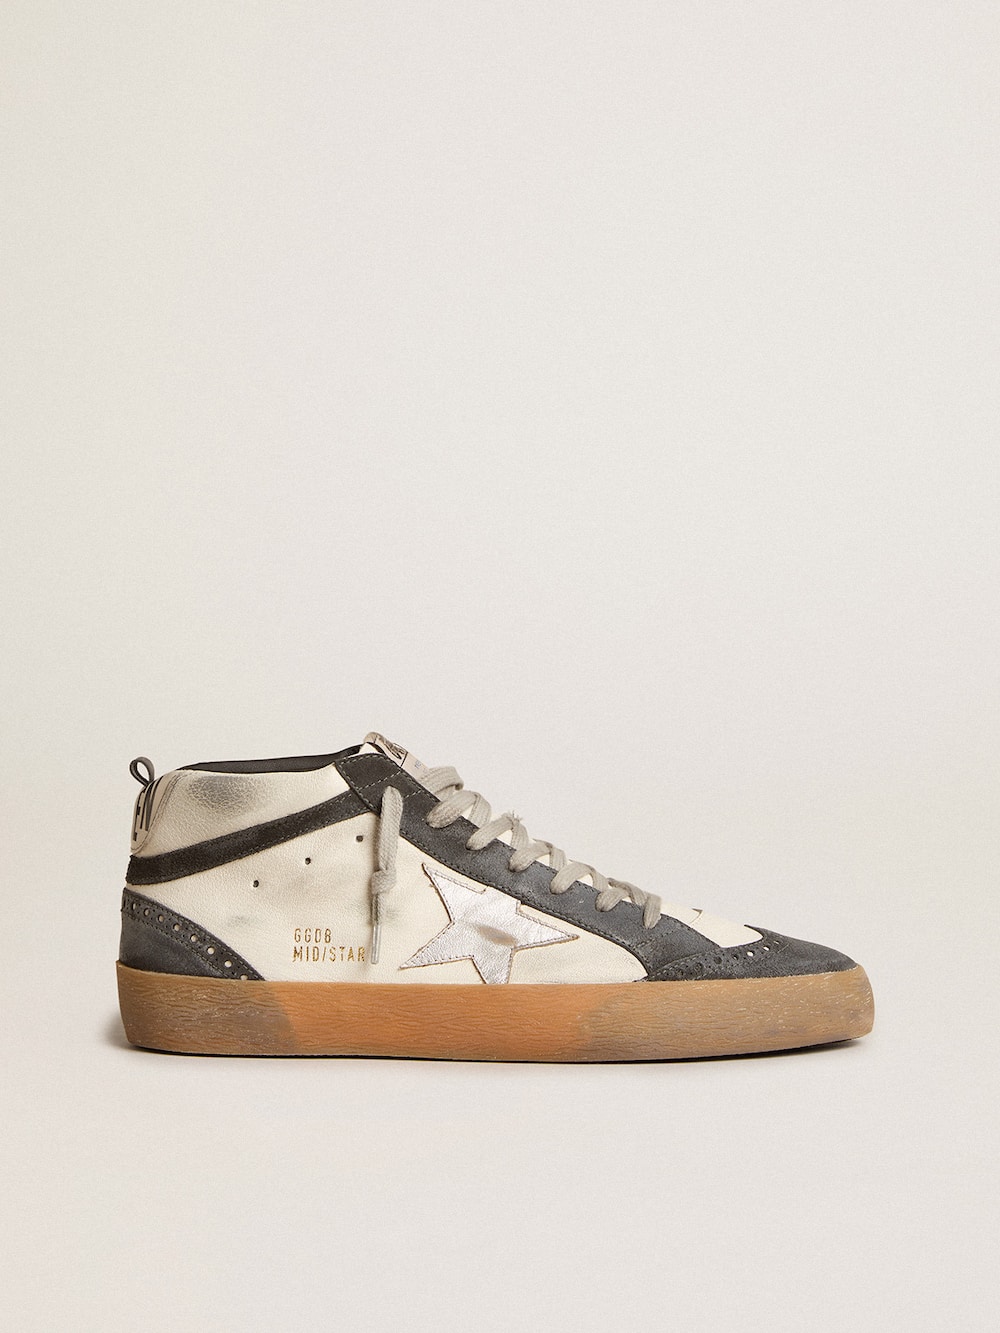 Golden Goose - Mid Star in nappa leather with silver leather star and black suede flash in 